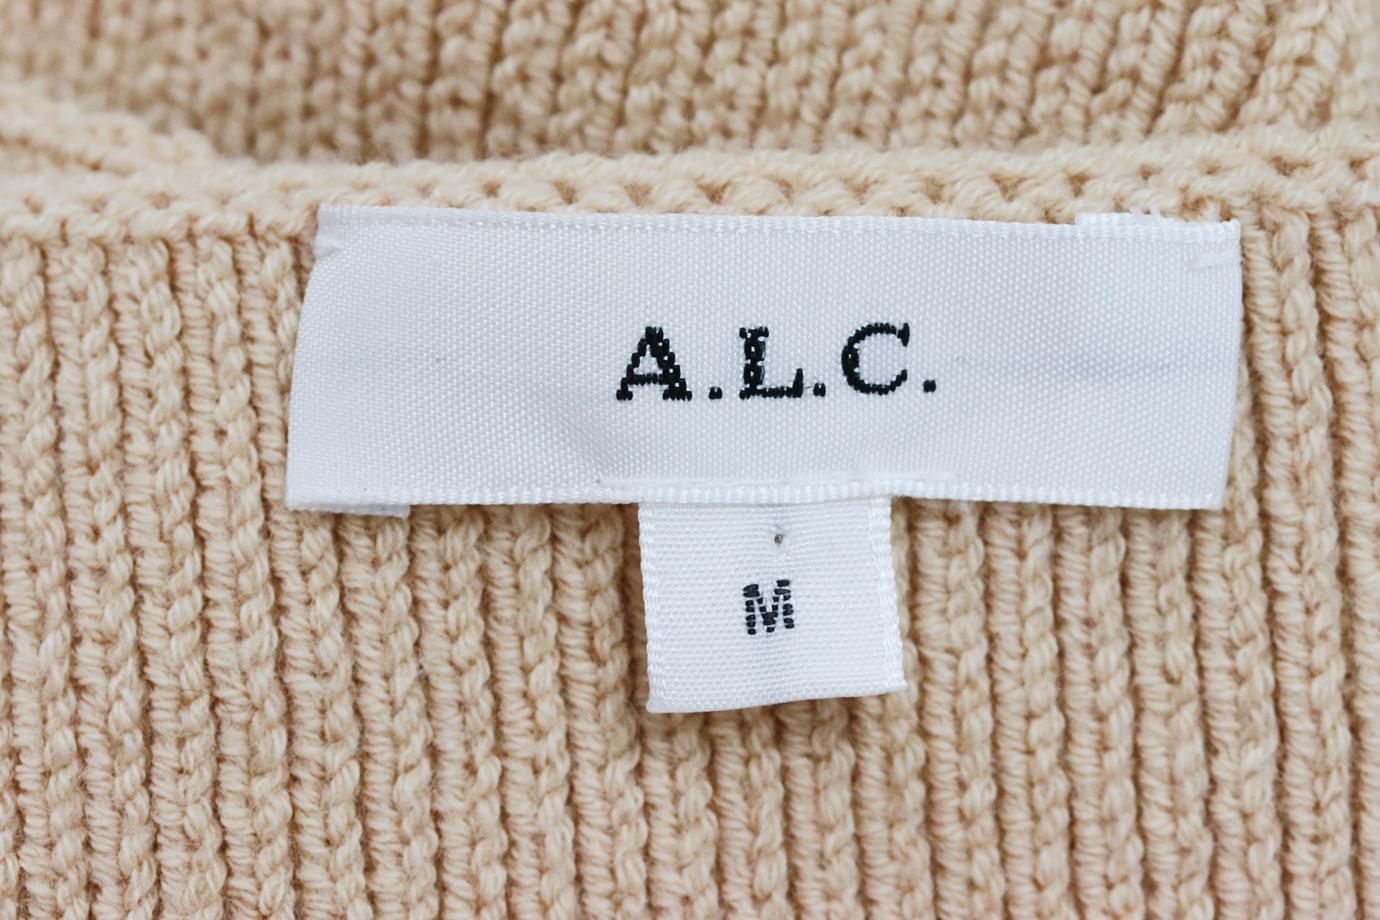 A.L.C. CROPPED RIBBED COTTON BLEND TOP MEDIUM